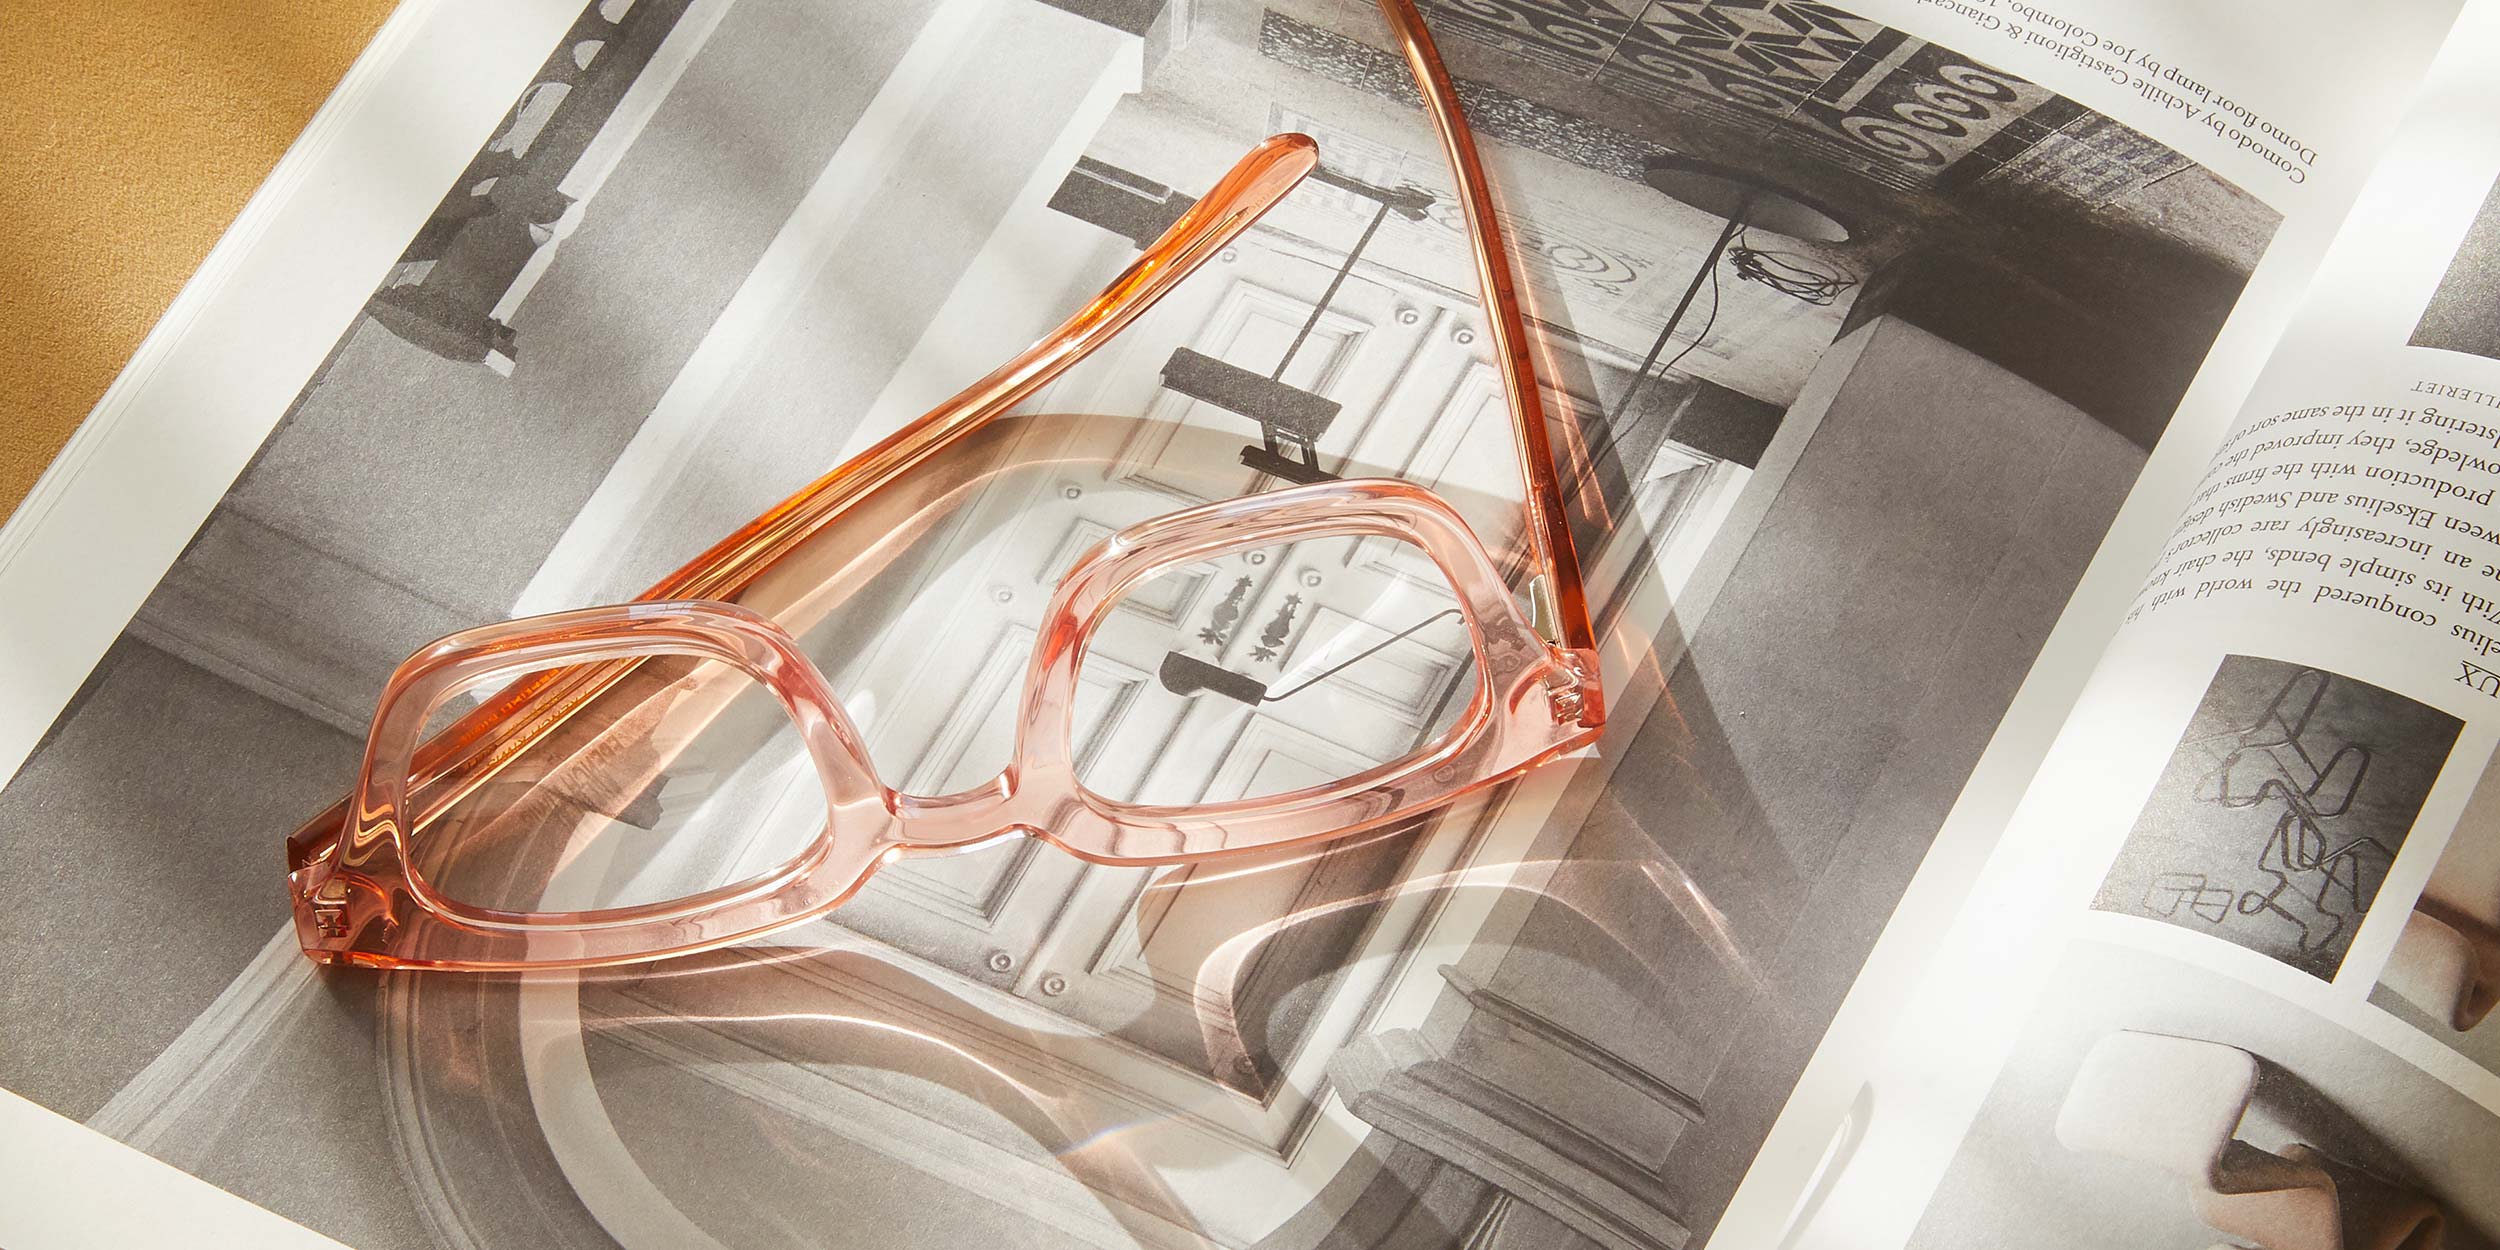 Photo Details of Ysée Honey Reading Glasses in a room